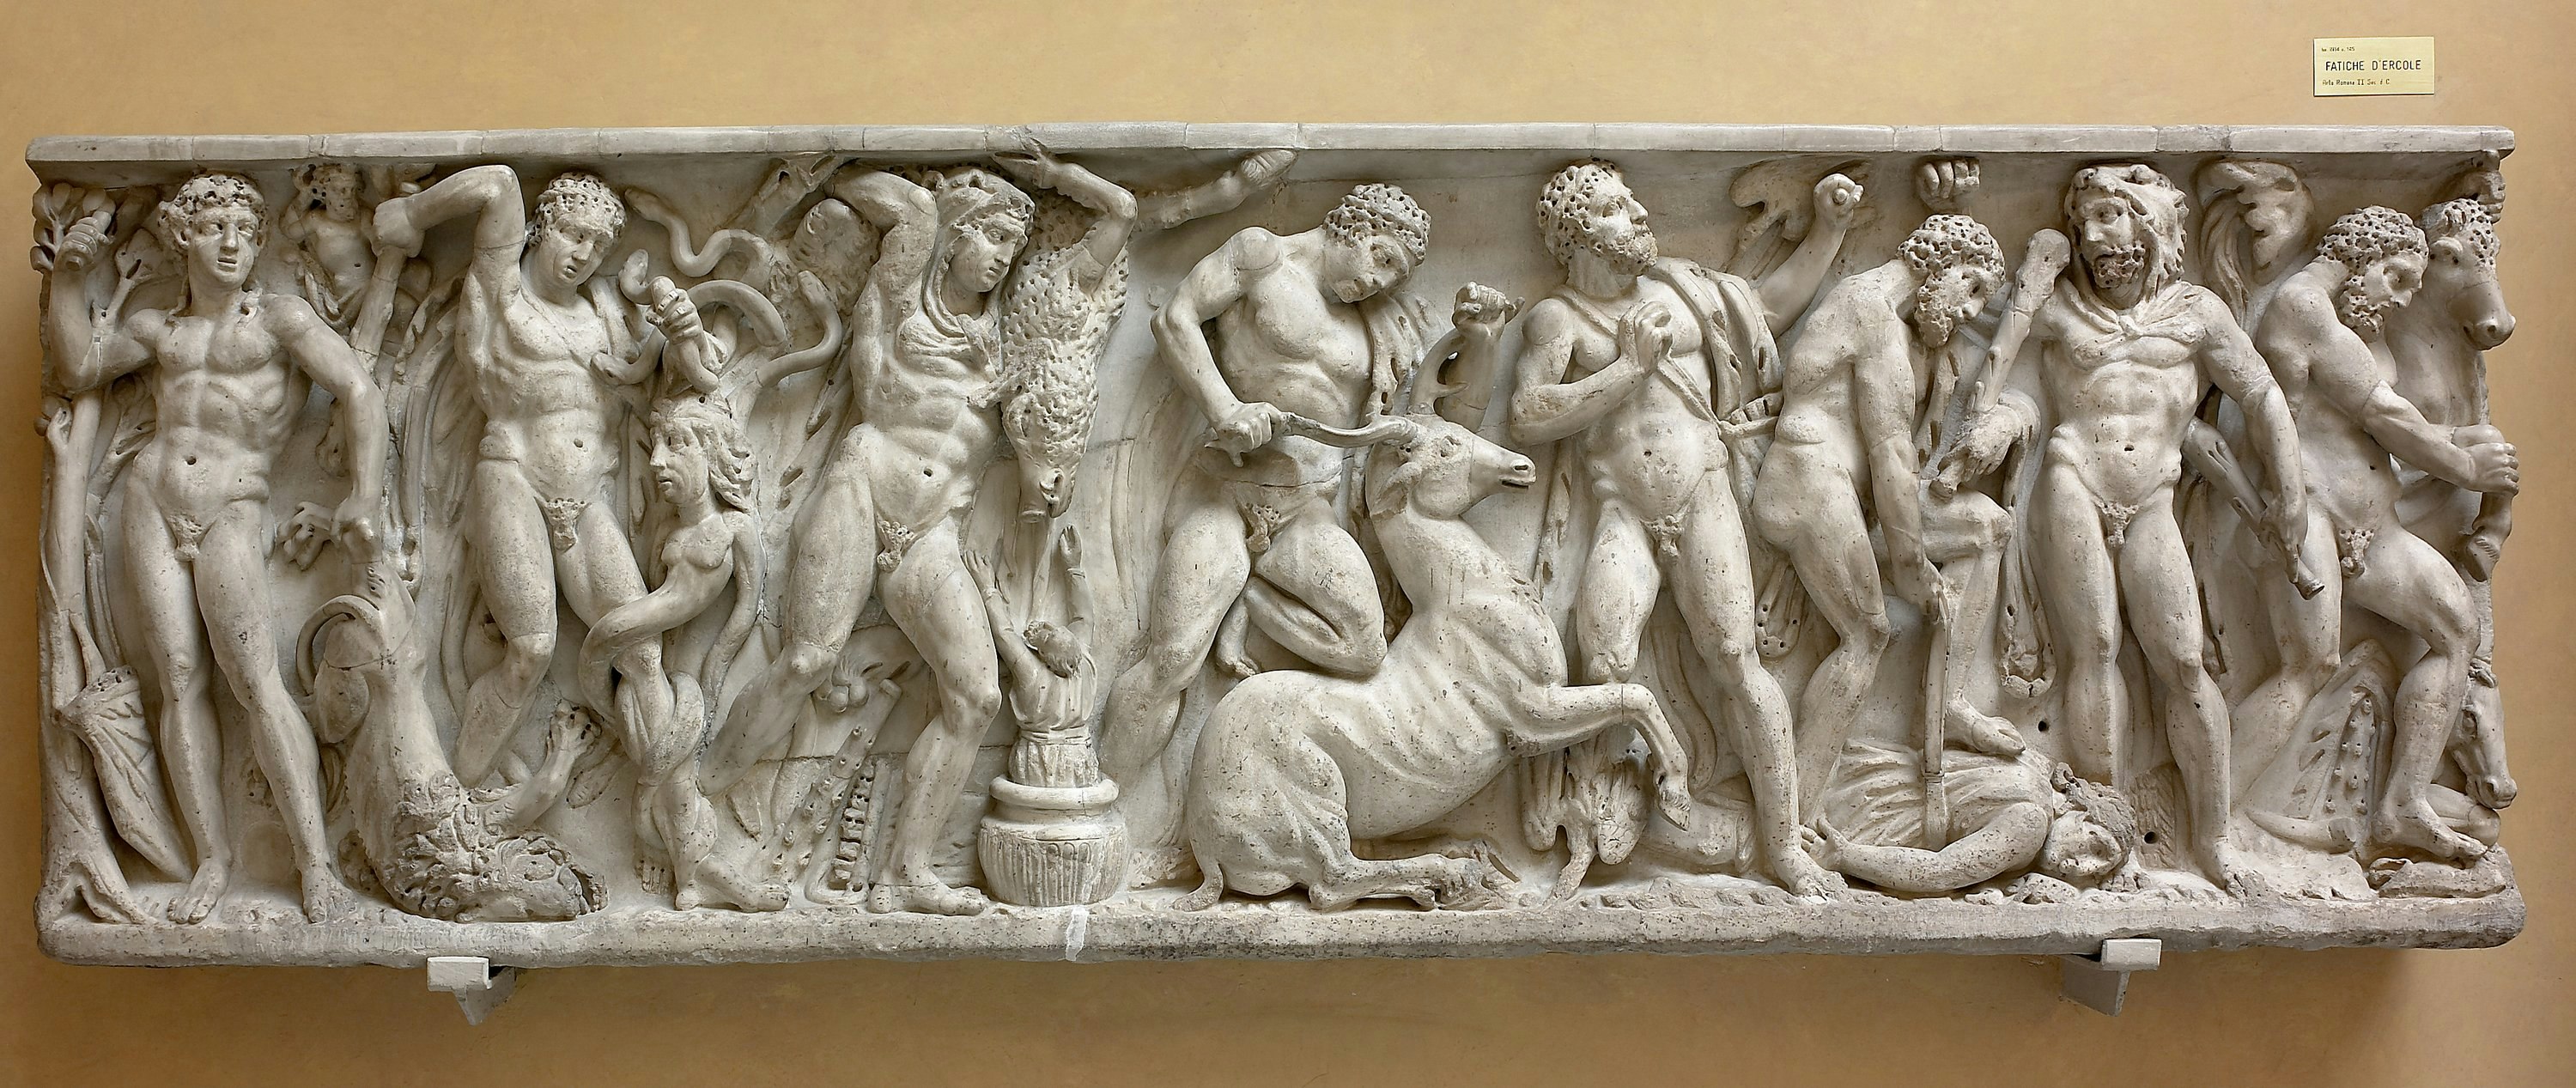 Front of sarcophagus depicting the Labours of Hercules